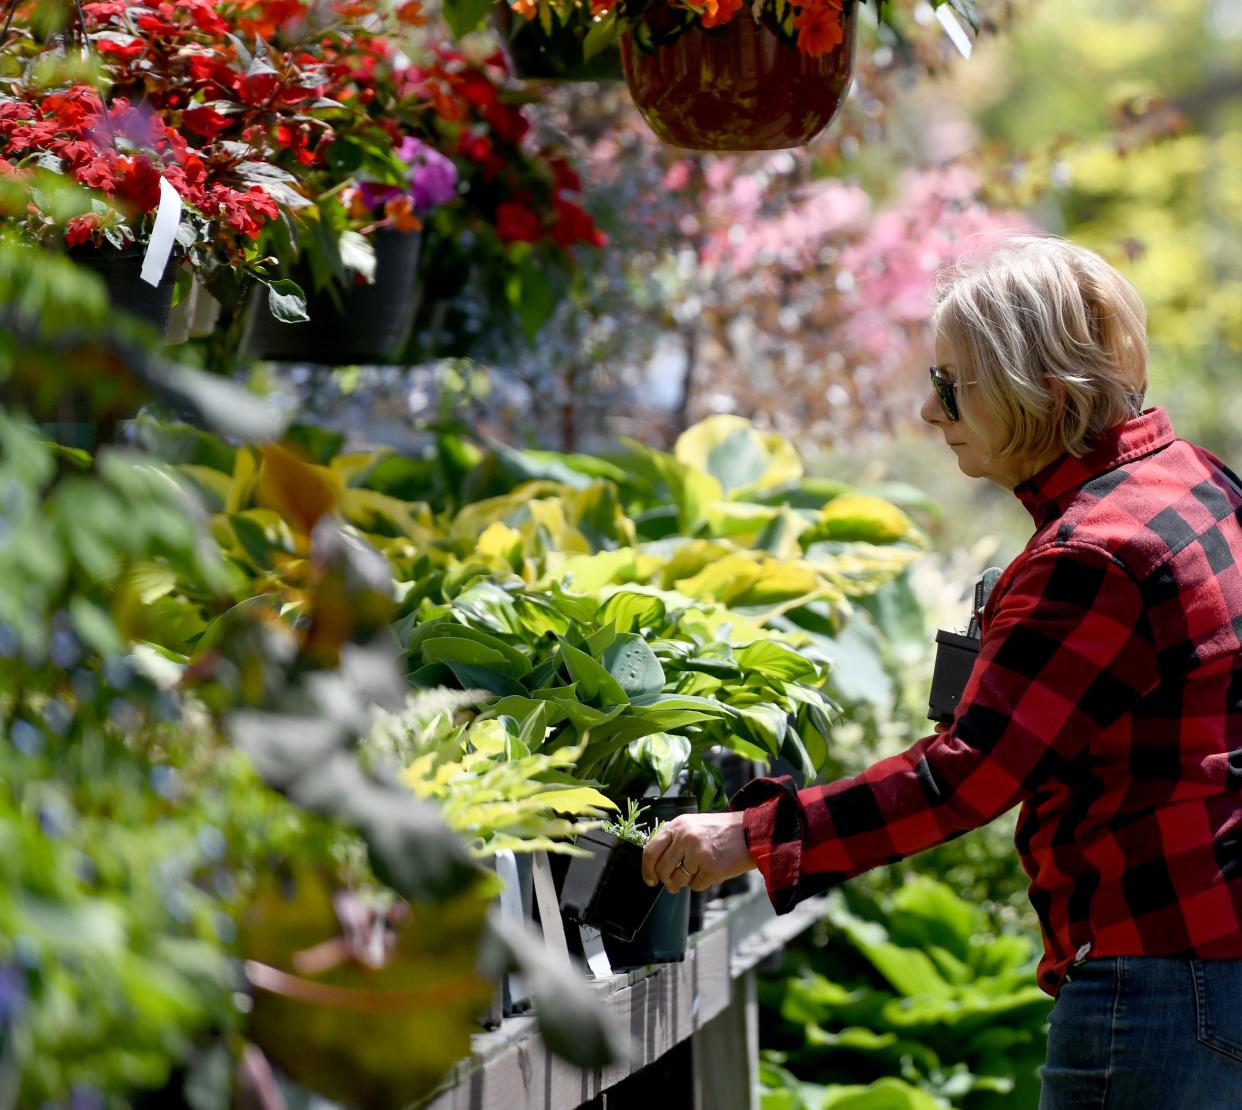 Laurie Weaver of New Franklin selects plants at Rohr & Sons Nursery & Garden Center on Portage Street in Jackson Township.